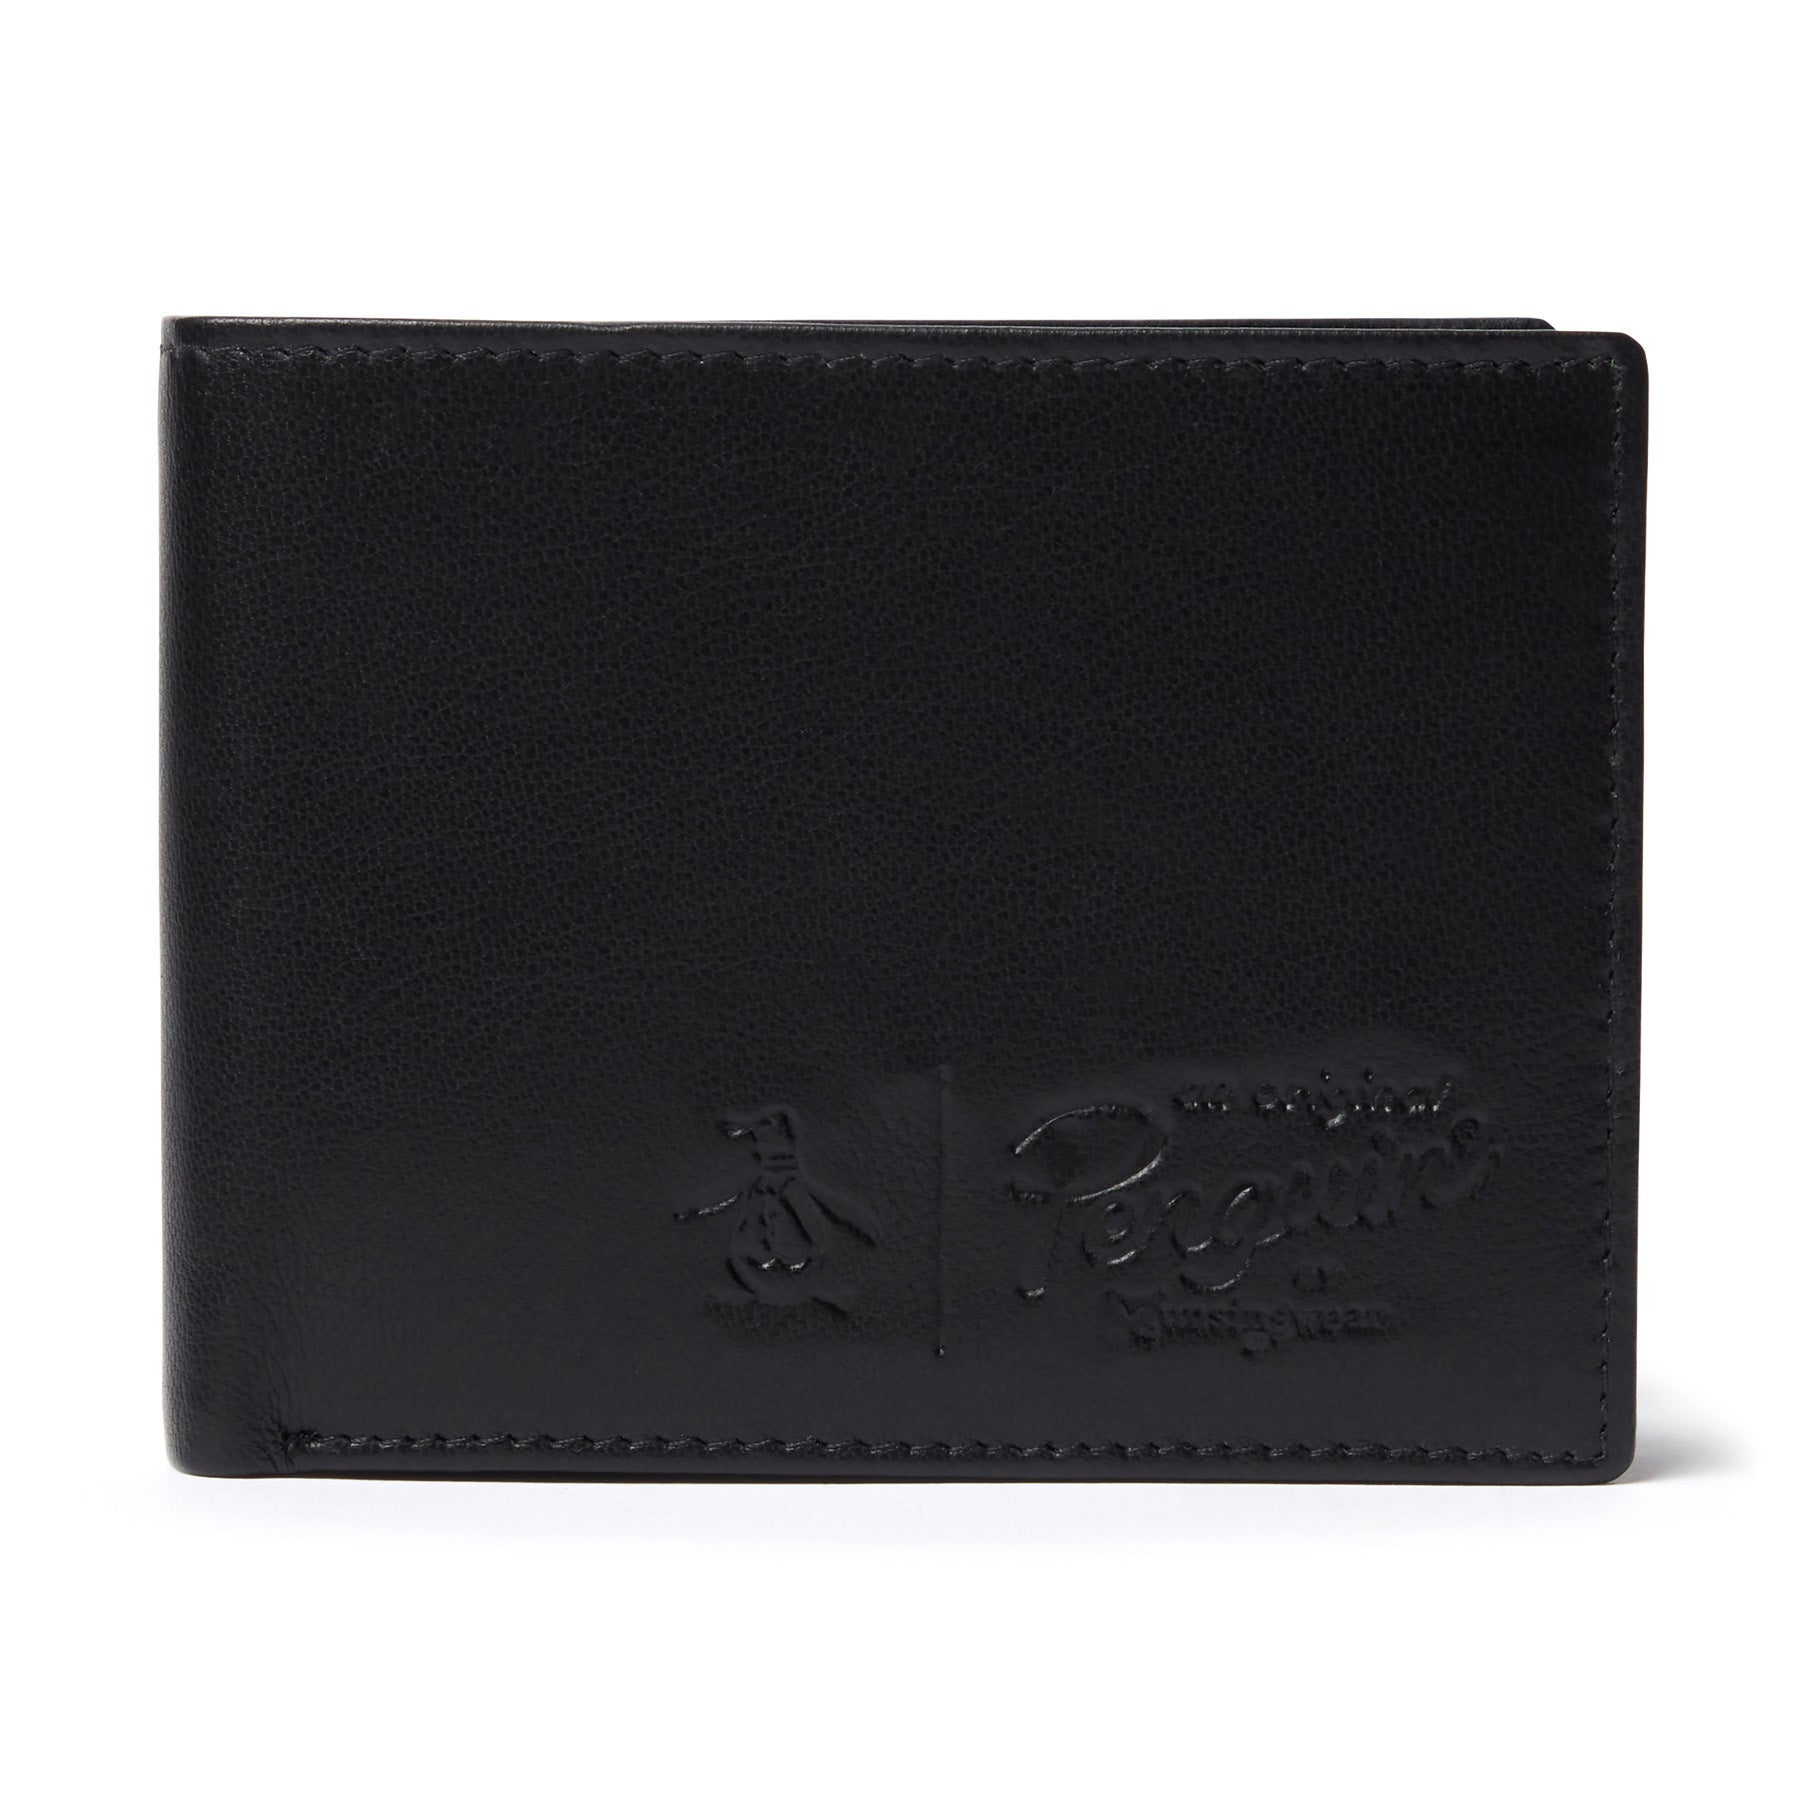 View Ralph Wallet And Card Holder In Black information